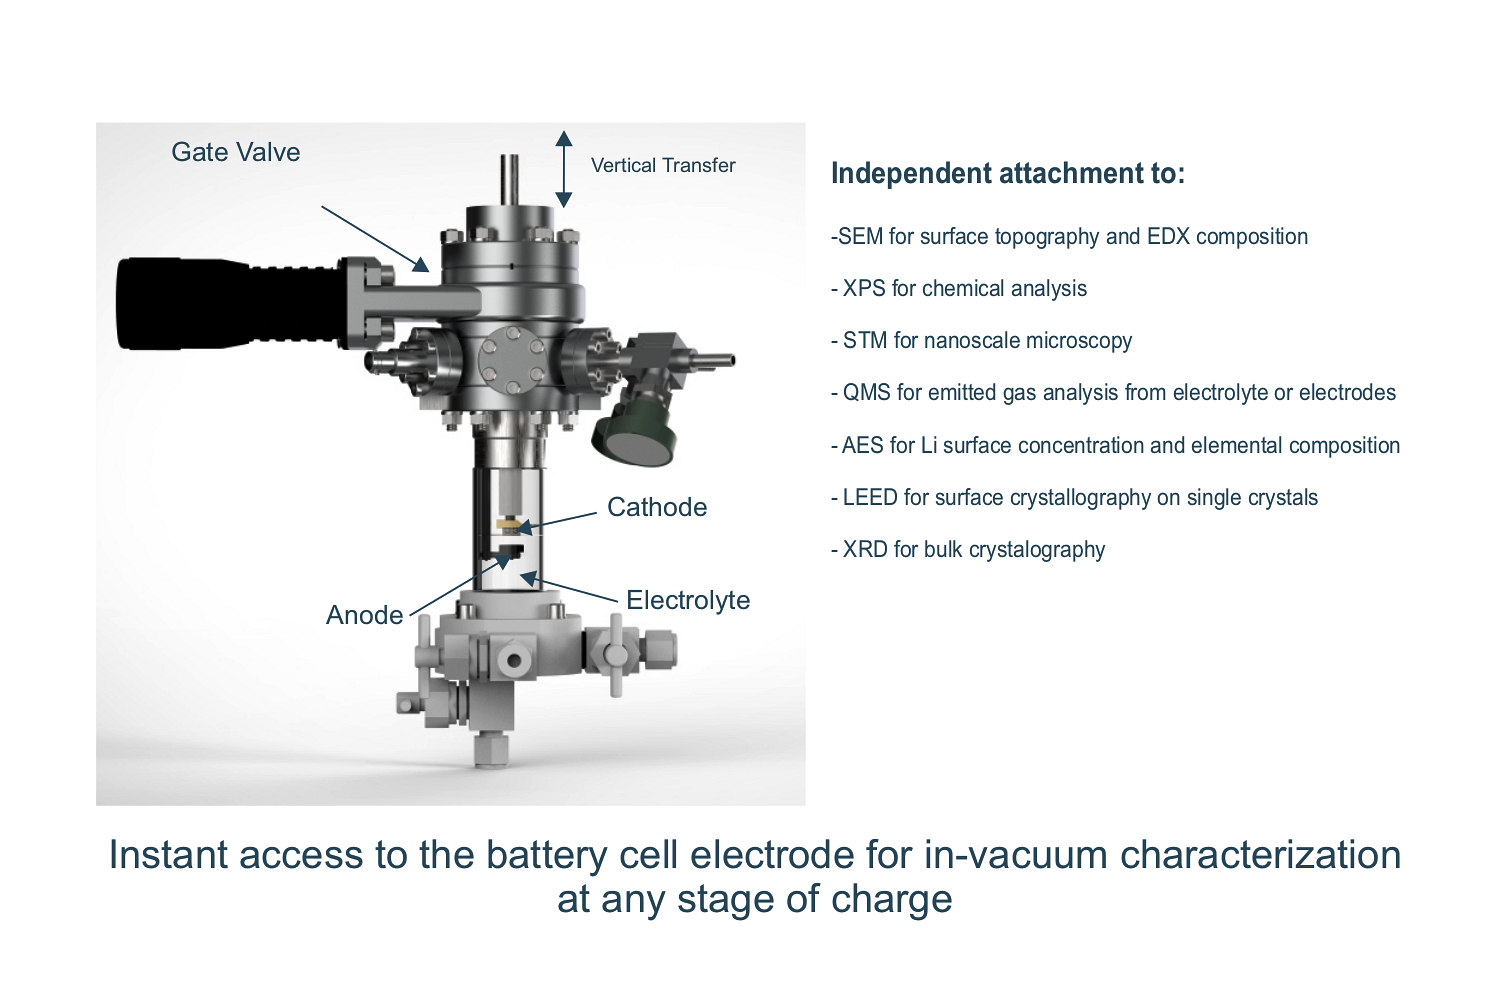 Figure 2. Split Test Cell with transferable electrode and UHV compatibility for battery R&D. Independent attachment to SEM/EDX, XPS, STM, AES, LEED, QMS and XRD. Instant access to the battery cell electrode for in-vacuum characterization at any stage of charge. 